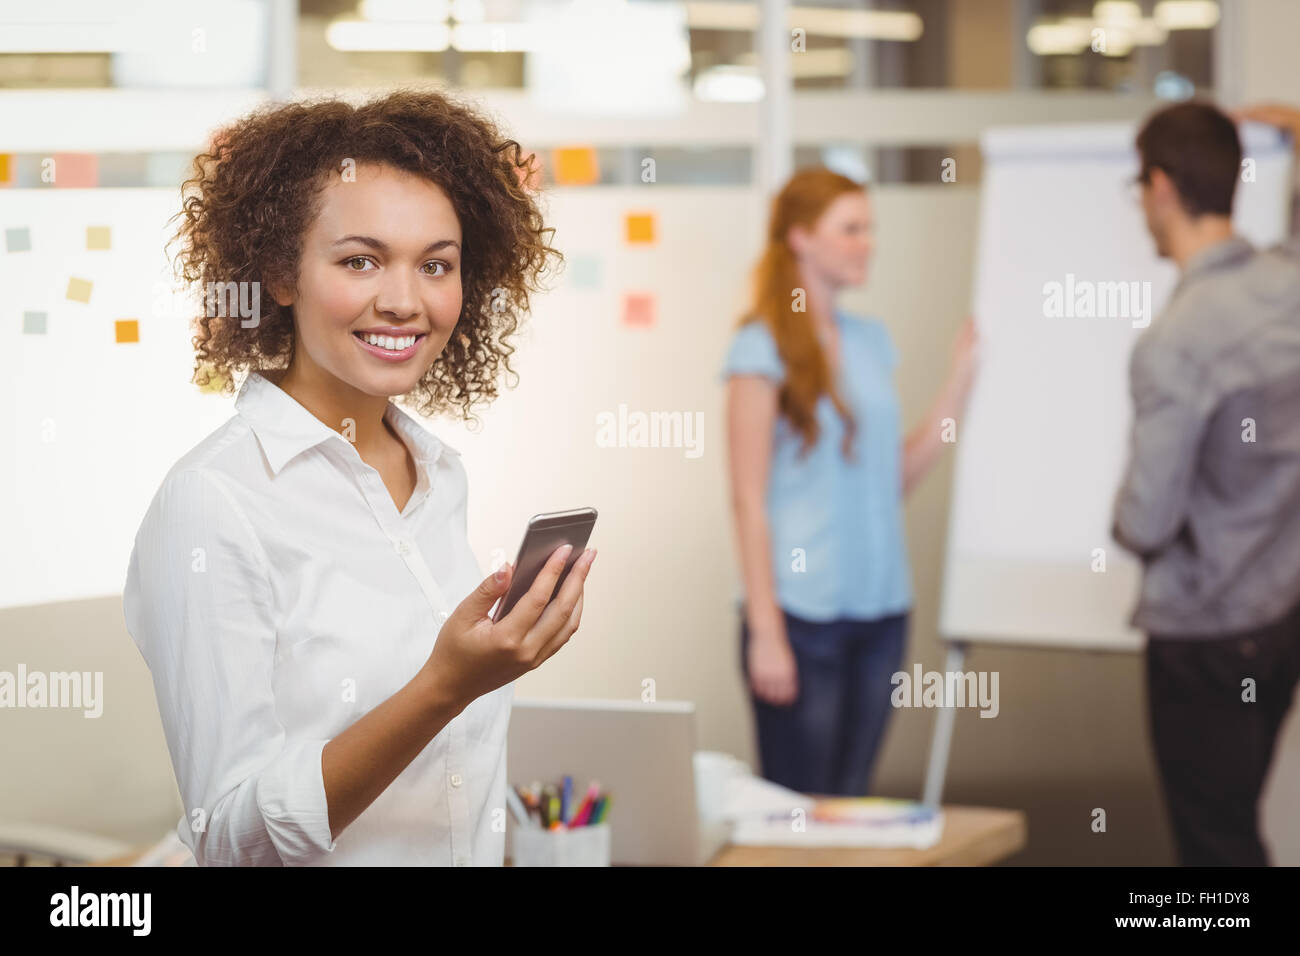 Smiling businesswoman using mobile phone Banque D'Images